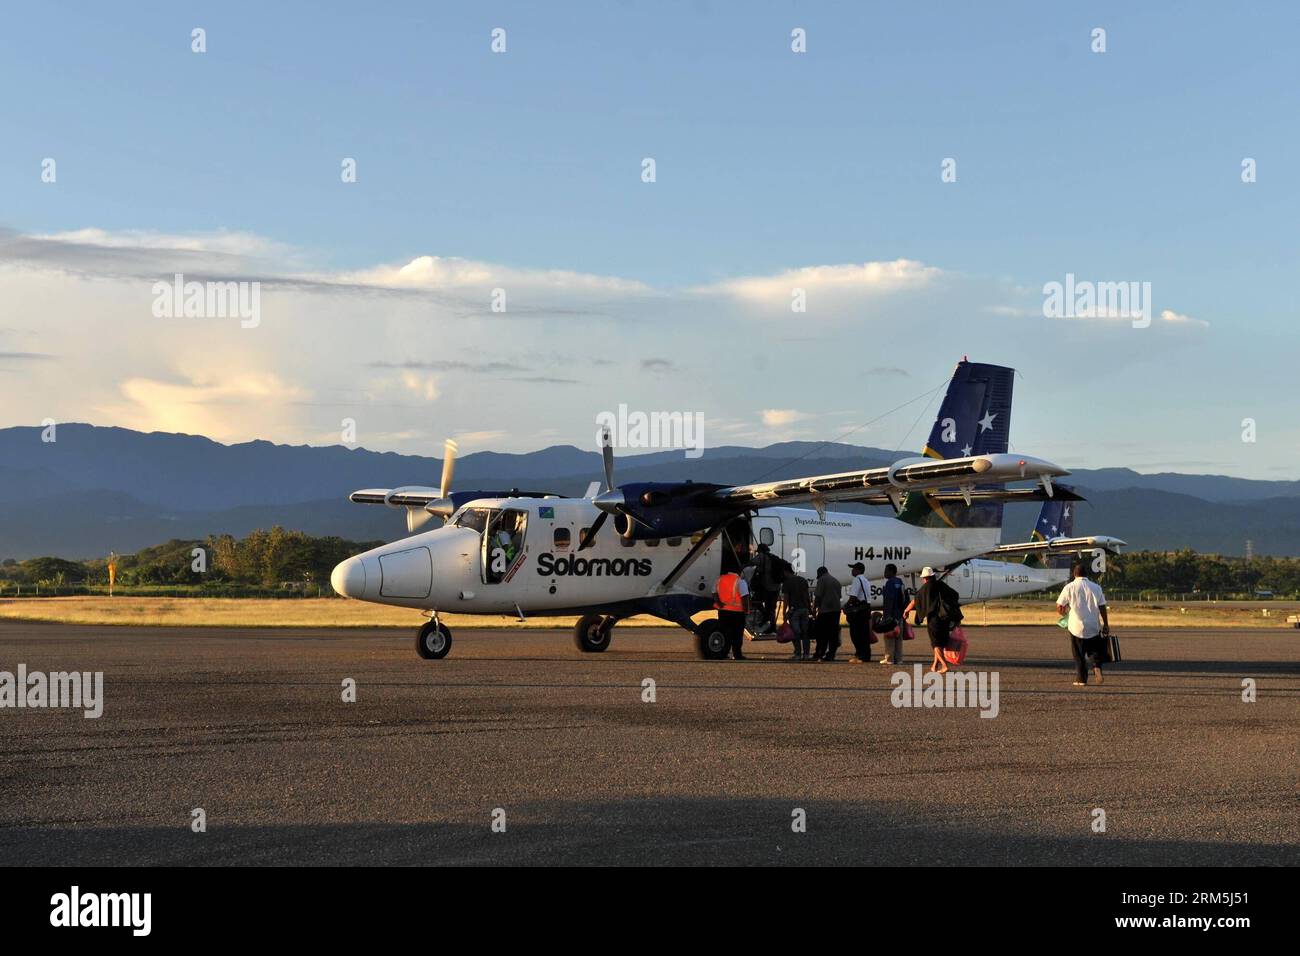 Bildnummer: 60668796  Datum: 29.10.2013  Copyright: imago/Xinhua Passengers are boarding a Twin Otter lightplane which has served 30 years at the Honiara Airport in Solomon Islands, Oct. 29, 2013. The Solomon Airlines owns a history of more than 50 years. The DHC 8-102 , Twin Otter and Islander are three kinds of vintage lightplanes serving for national flights which can respectively carry 36, 16 and 9 passengers. Most of these planes have served more than ten years or even dozens of years. (Xinhua/Gao Jianjun) SOLOMON ISLANDS-SOLOMON AIRLINES-VINTAGE LIGHTPLANES PUBLICATIONxNOTxINxCHN Gesells Stock Photo